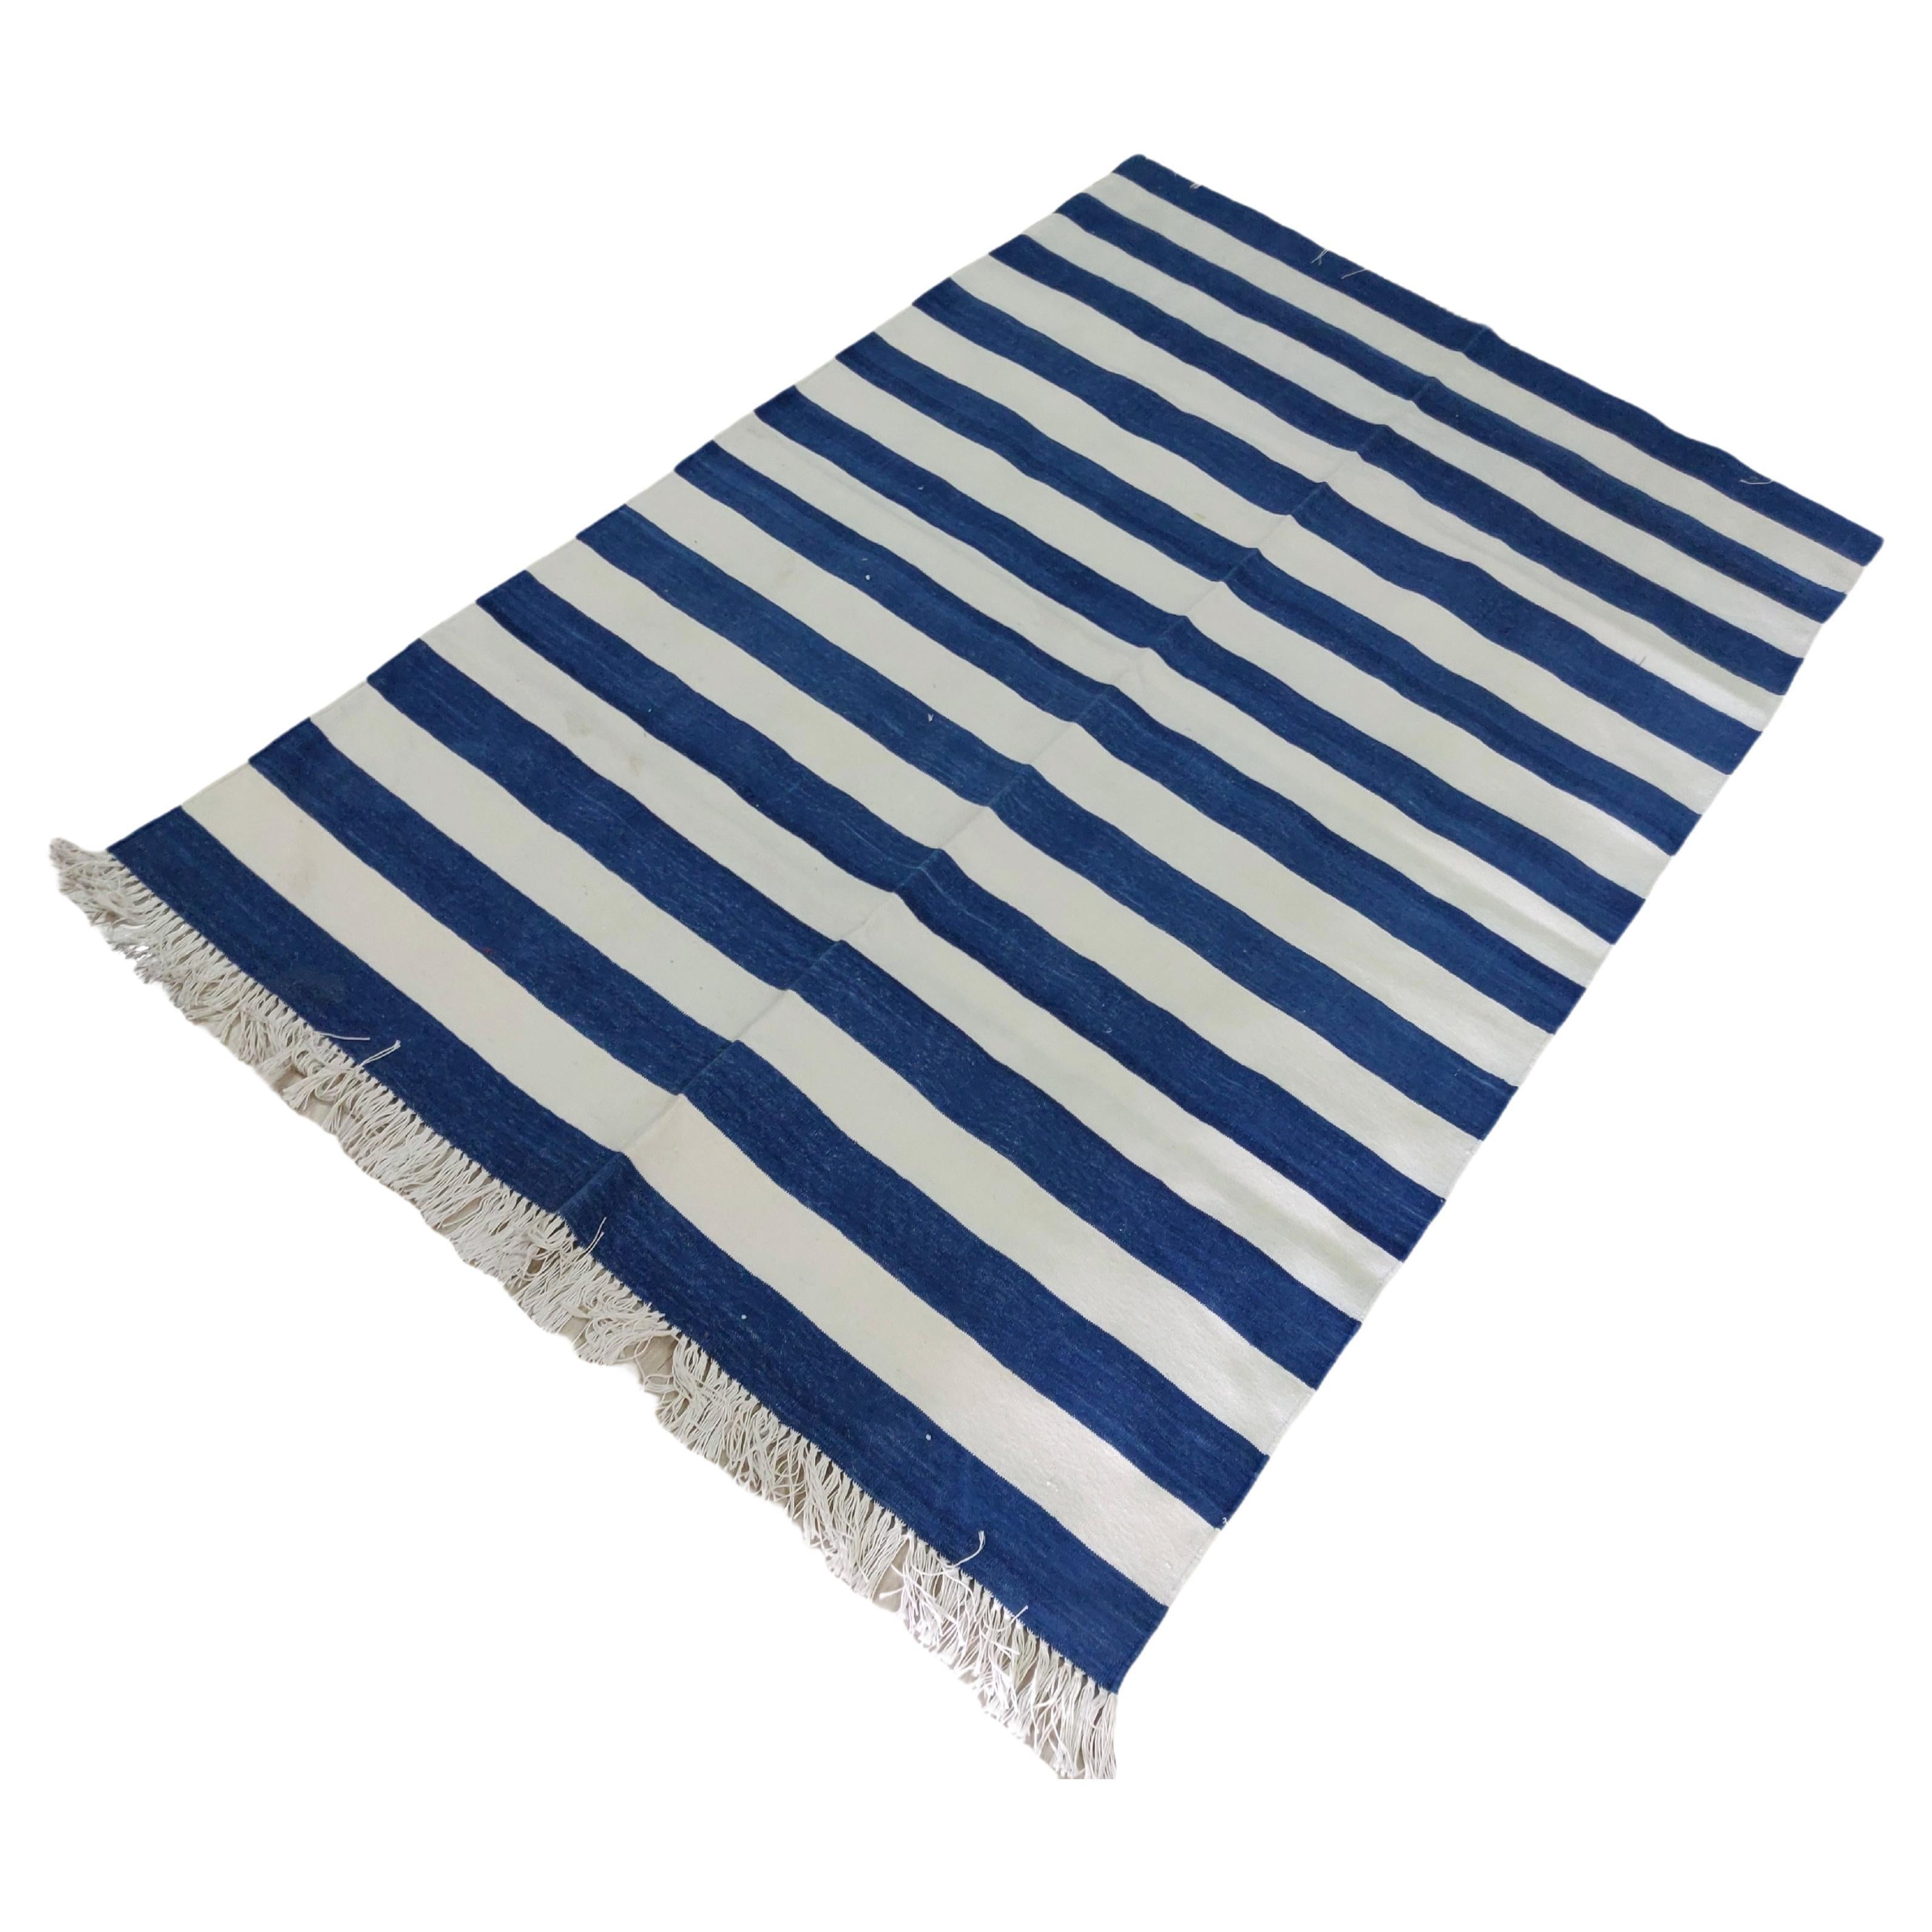 Handmade Cotton Area Flat Weave Rug, 4x6 Blue And White Striped Indian Dhurrie